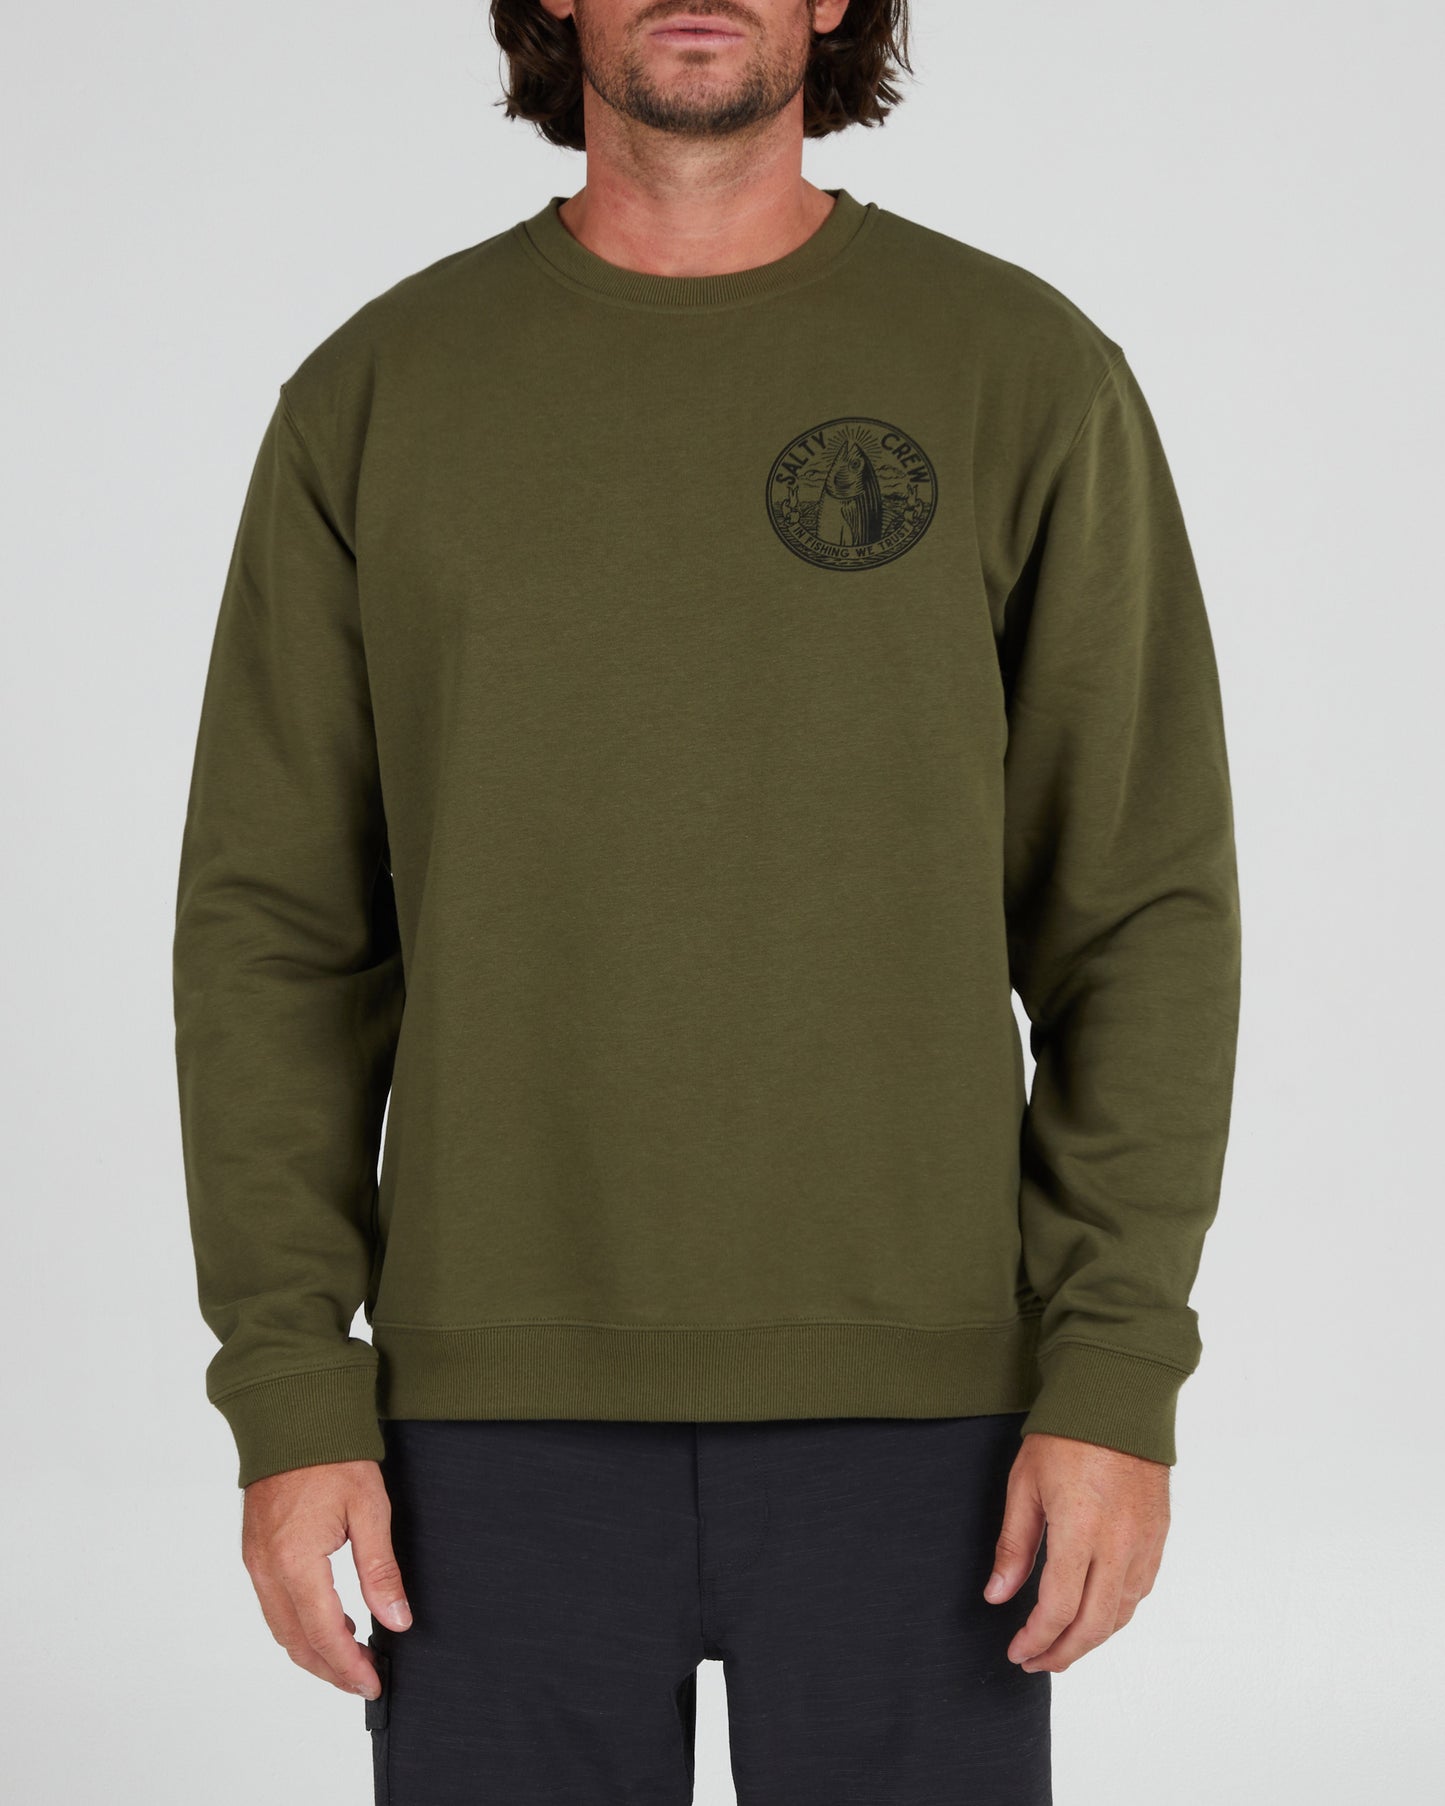 On body front of the In Fishing We Trust Army Crew Fleece